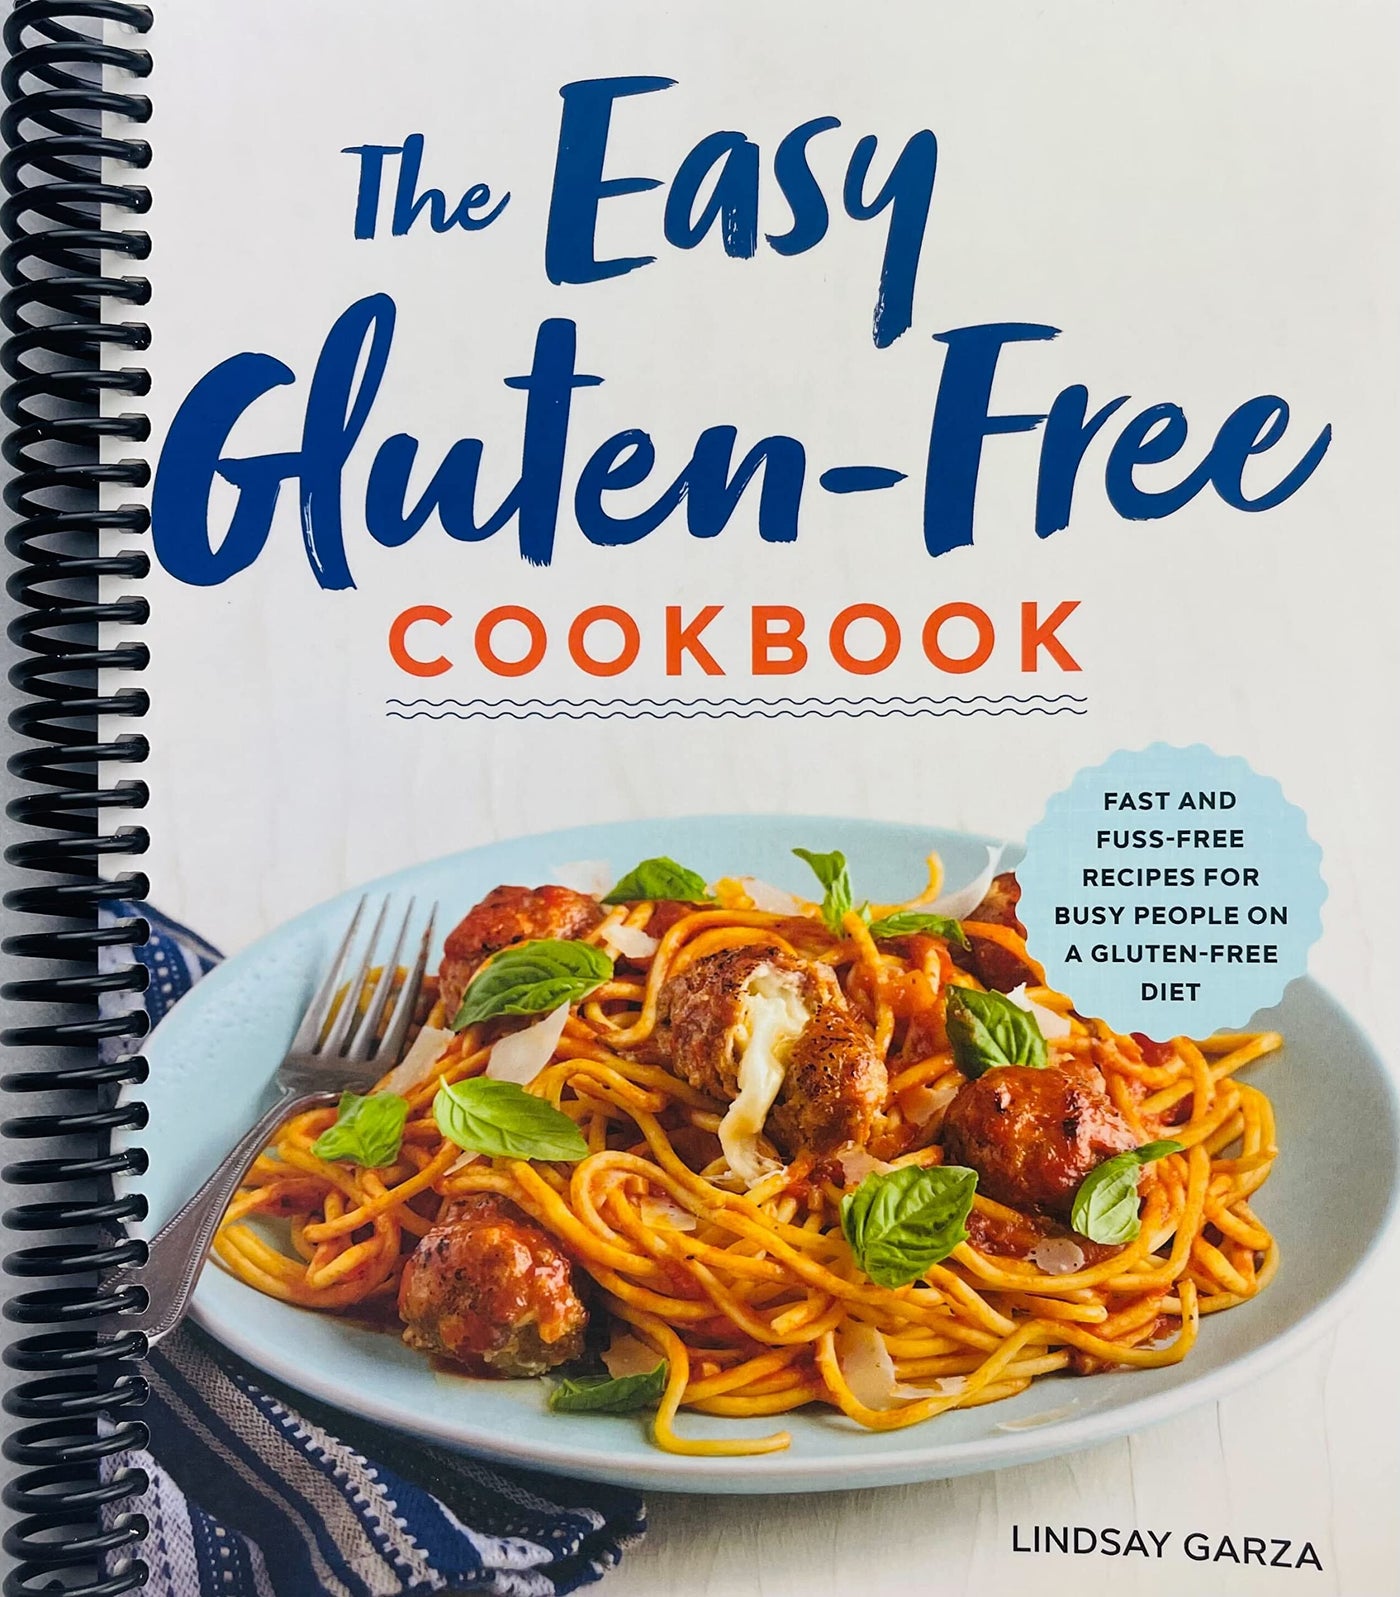 The Easy Gluten-Free Cookbook: Fast and Fuss-Free Recipes for Busy People on a Gluten-Free Diet (Spiral Bound)